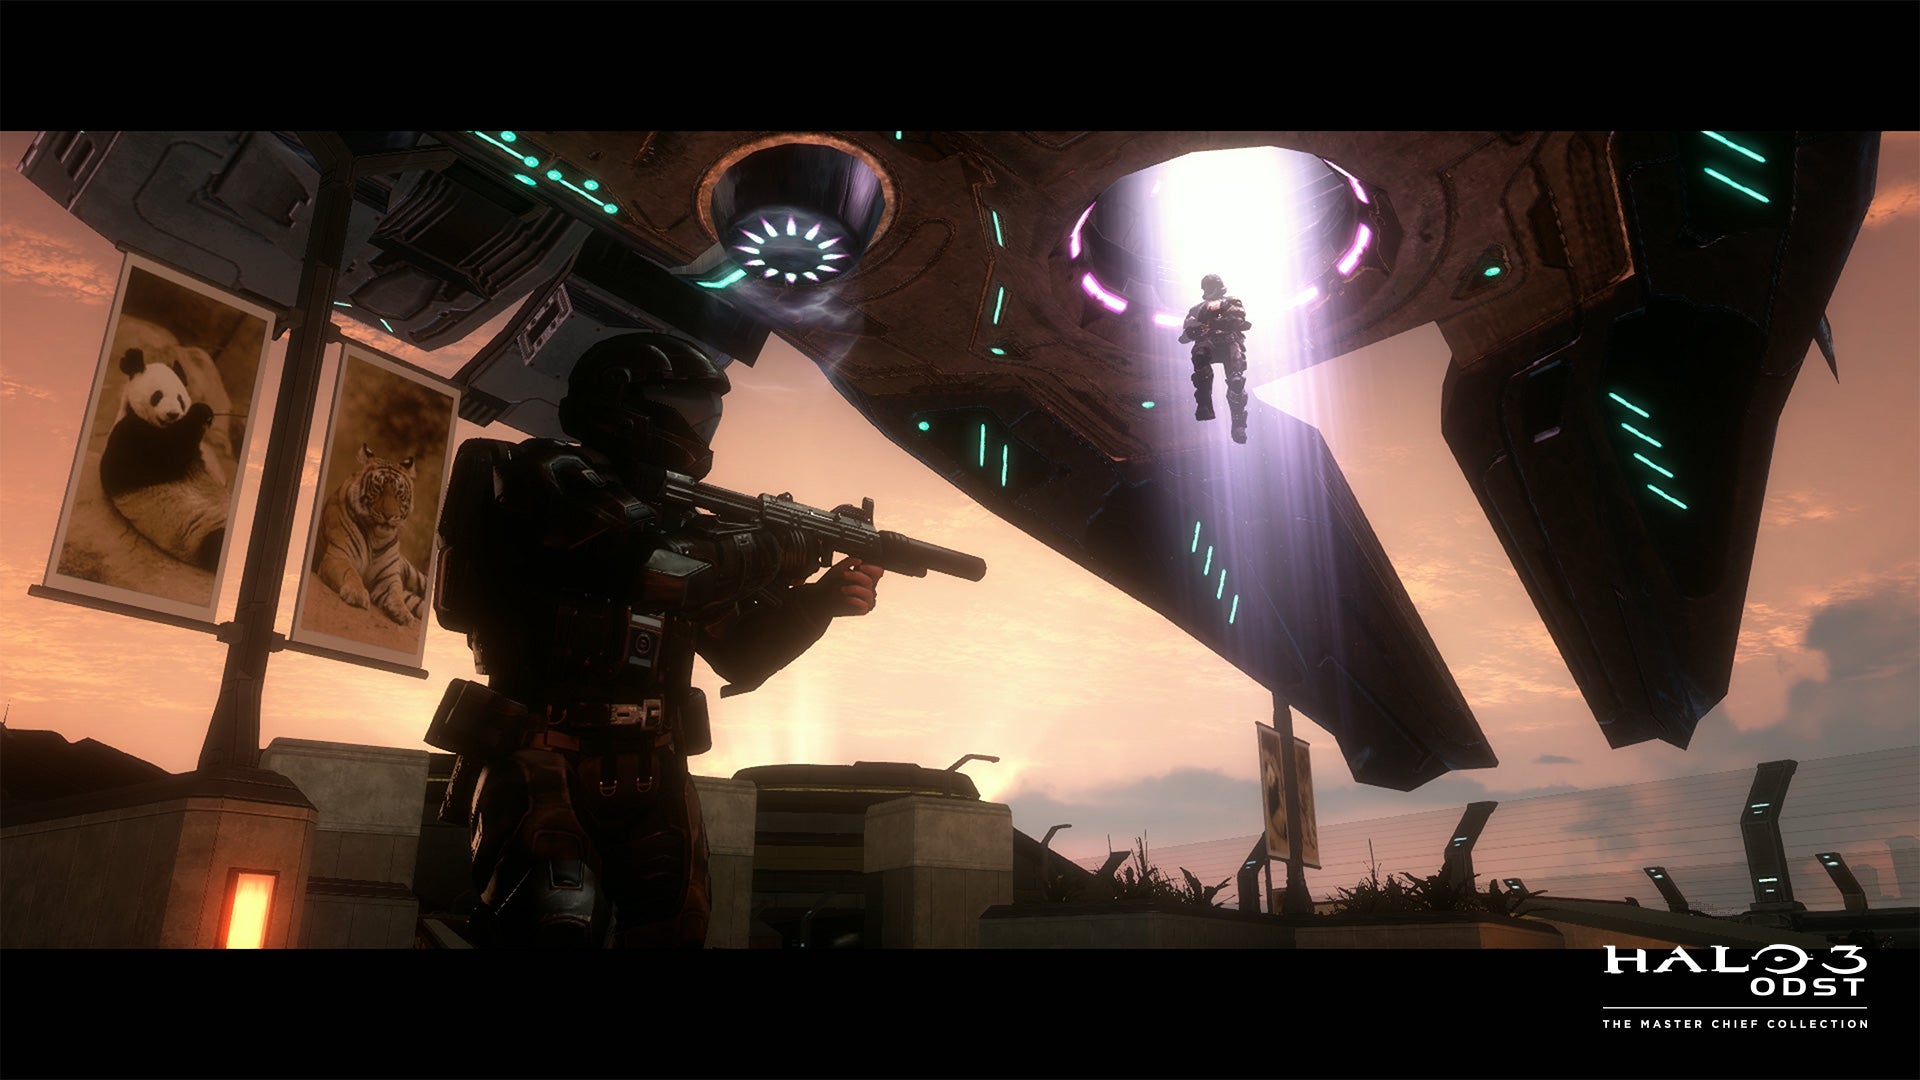 Image for Halo 3: ODST now available for PC with Halo: The Master Chief Collection